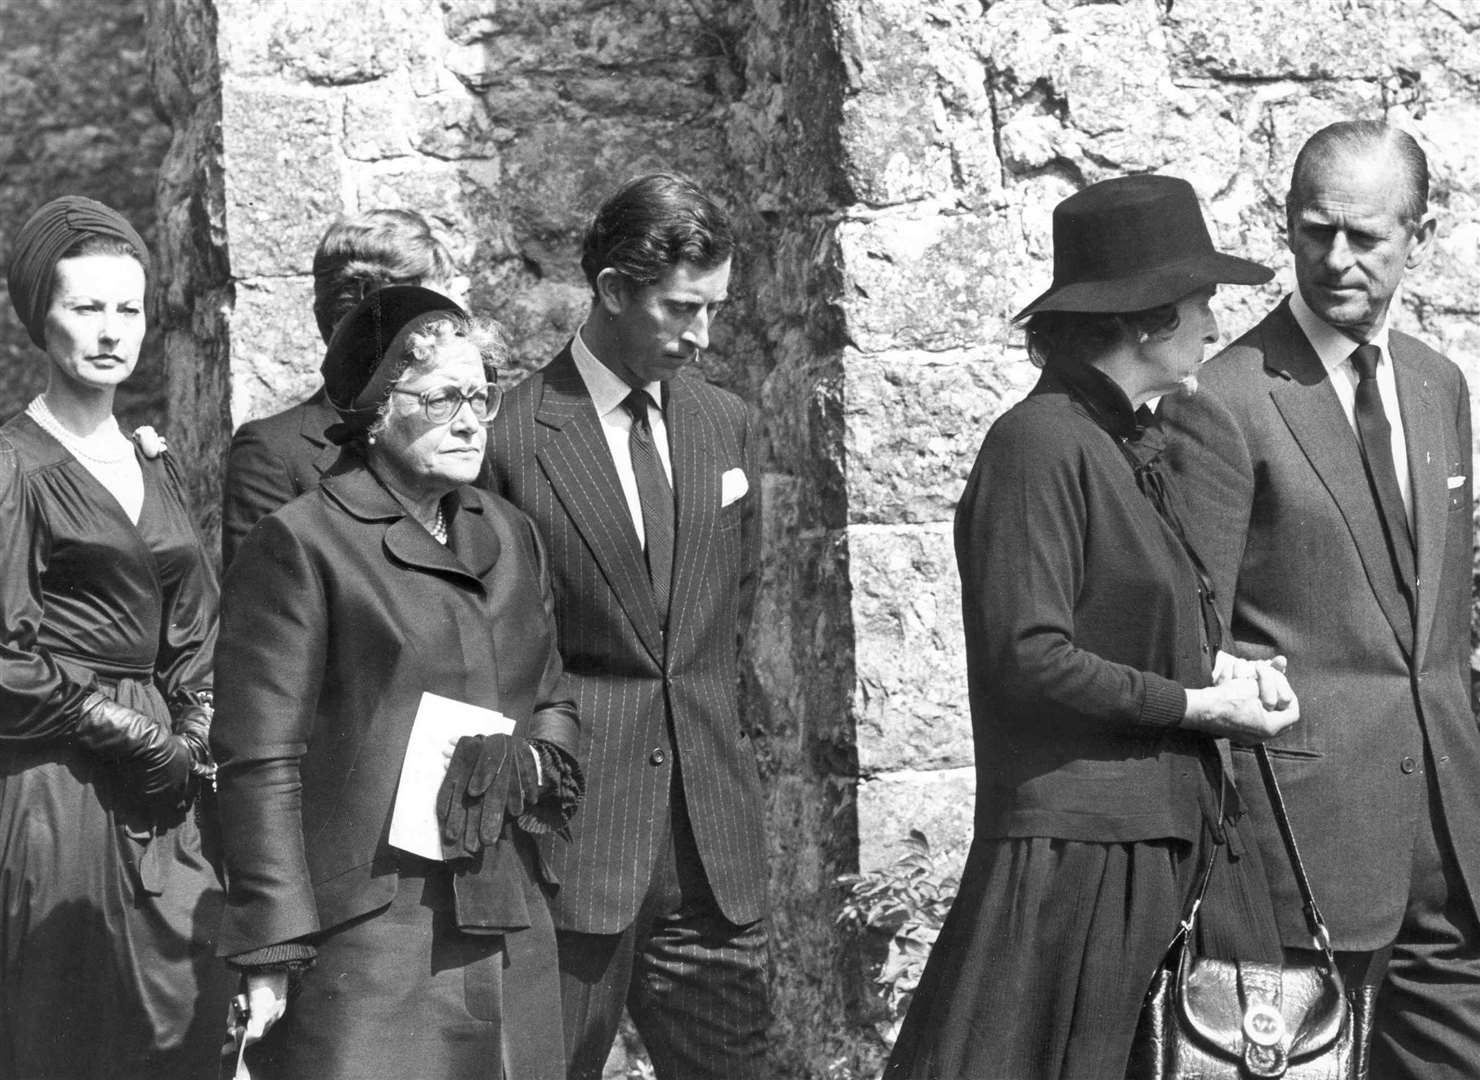 The Duke of Edinburgh and Prince Charles were among 500 mourners in Mersham for the funeral of Doreen, Dowager Lady Brabourne, and her grandson, Nicholas Knatchbull, 14, who were both victims of the IRA bomb. Among the wreaths left at the Brabourne family vault were two handwritten cards from the Queen and Prince Philip and one from Prince Charles to his godson, Nicholas